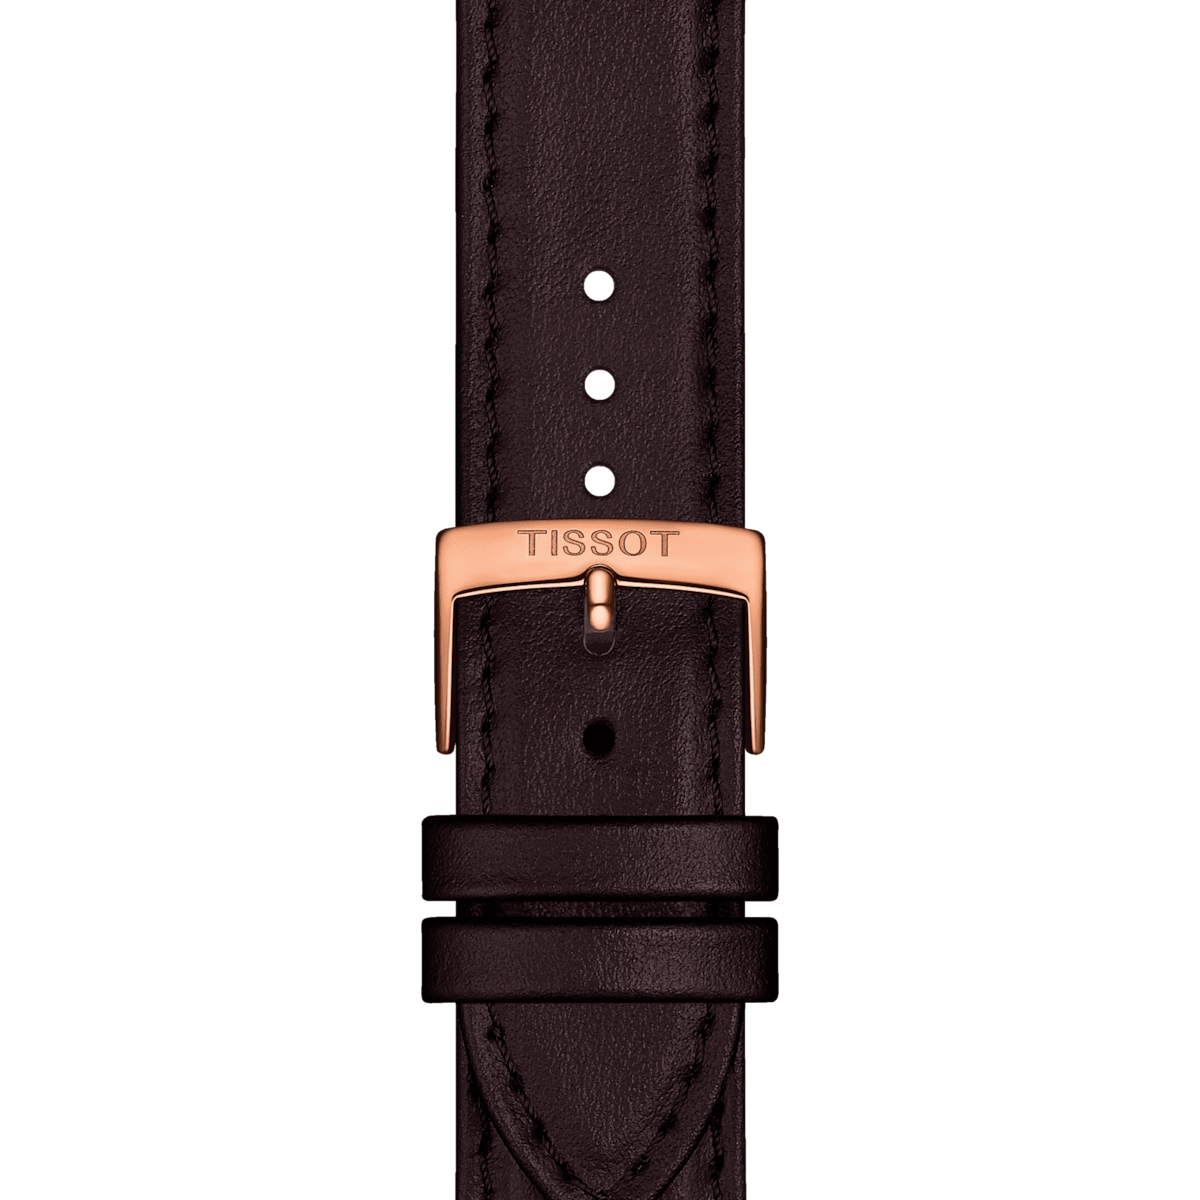 T-Classic Everytime Gent Brown Leather